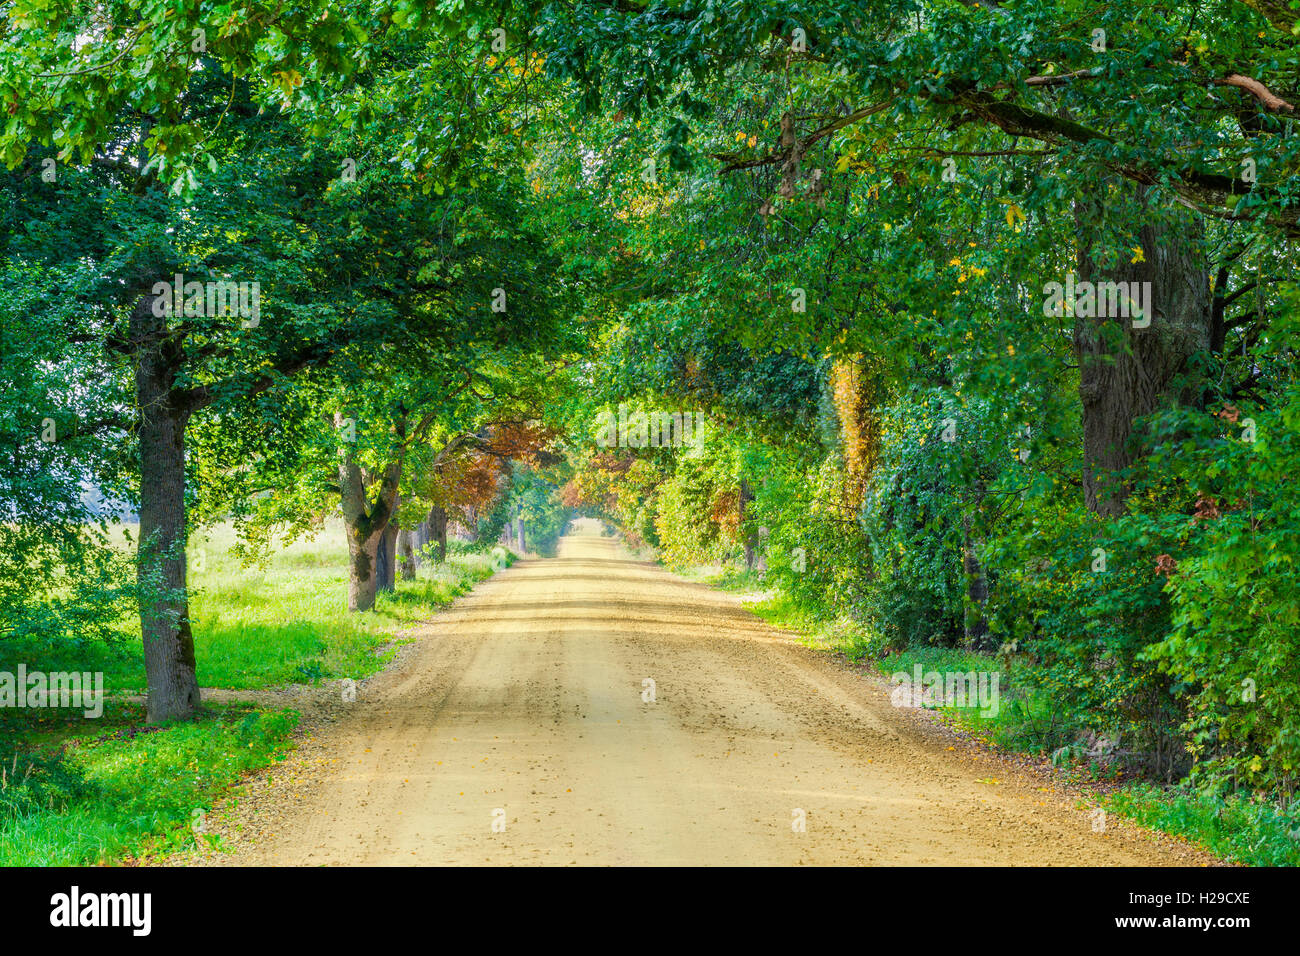 Rural road with tree alley Stock Photo